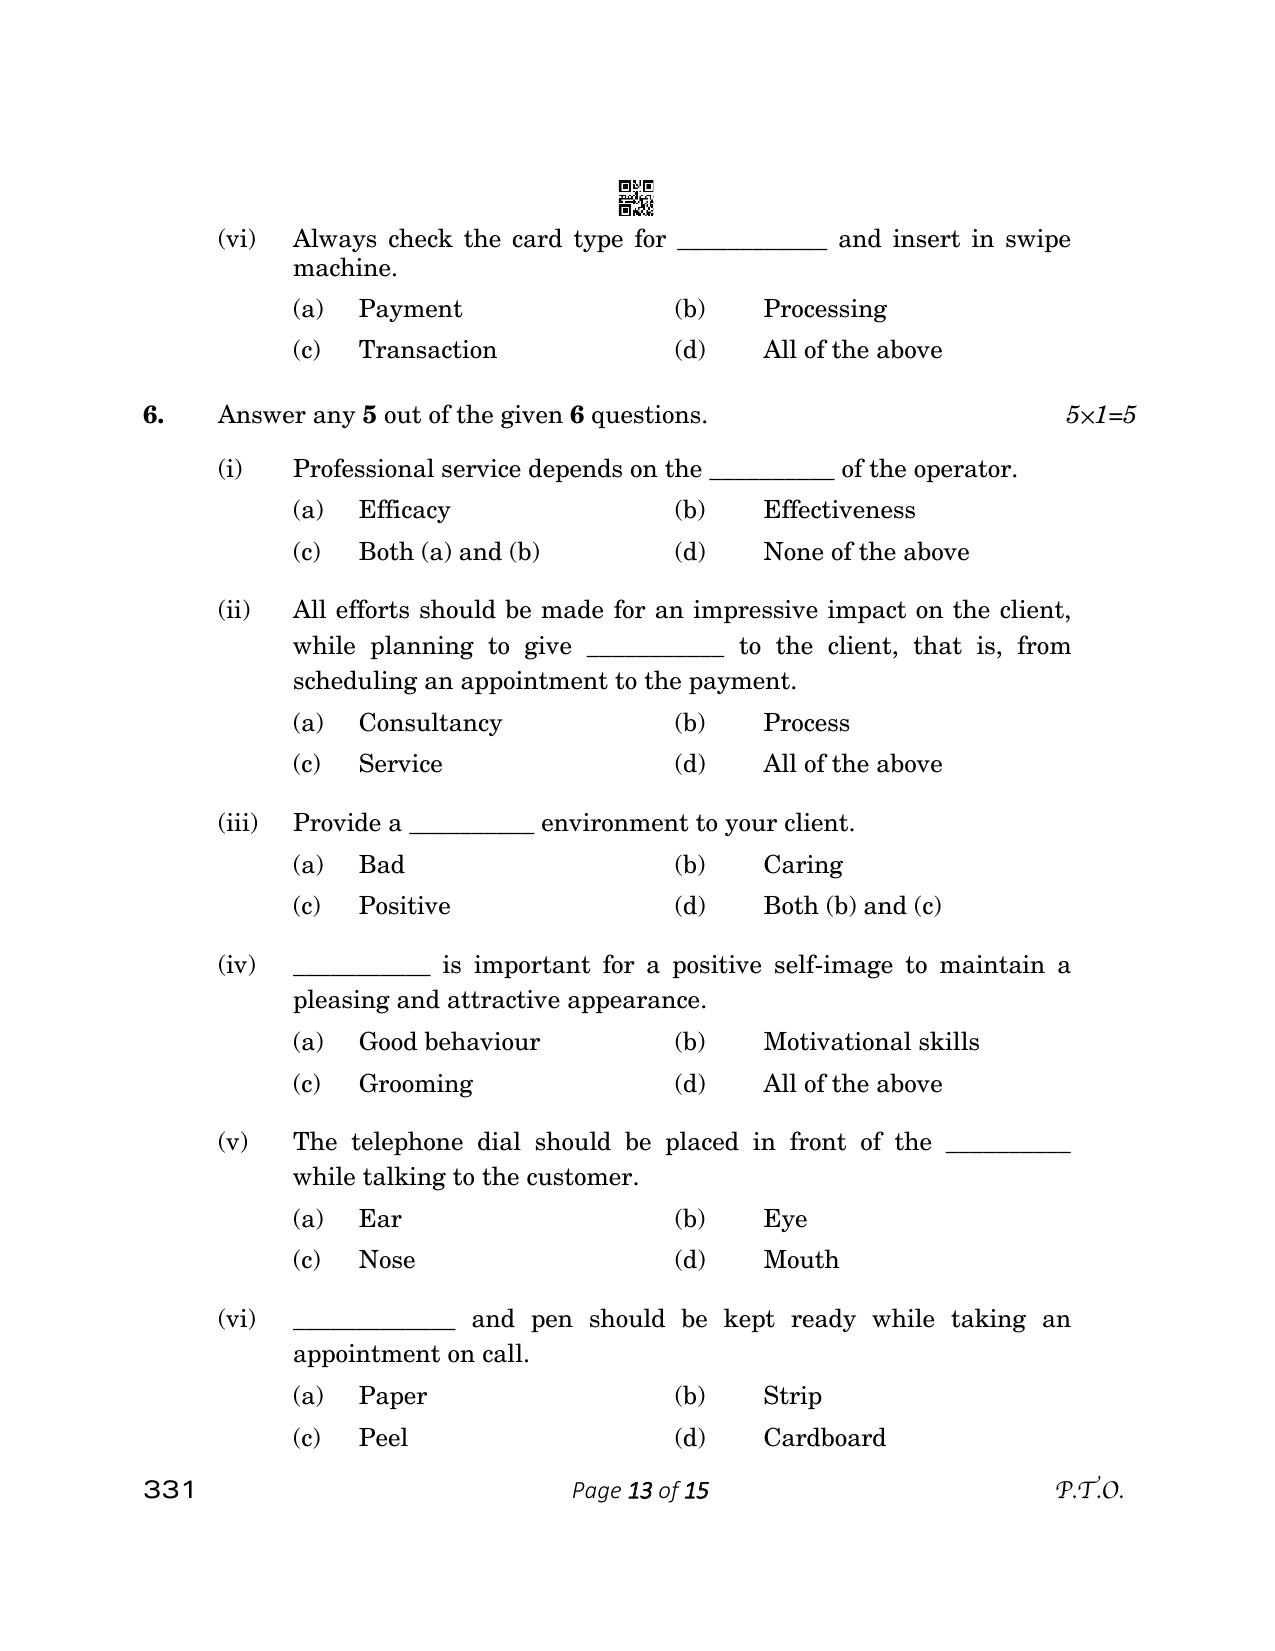 CBSE Class 12 331 Beauty And Wellness 2023 Question Paper - Page 13